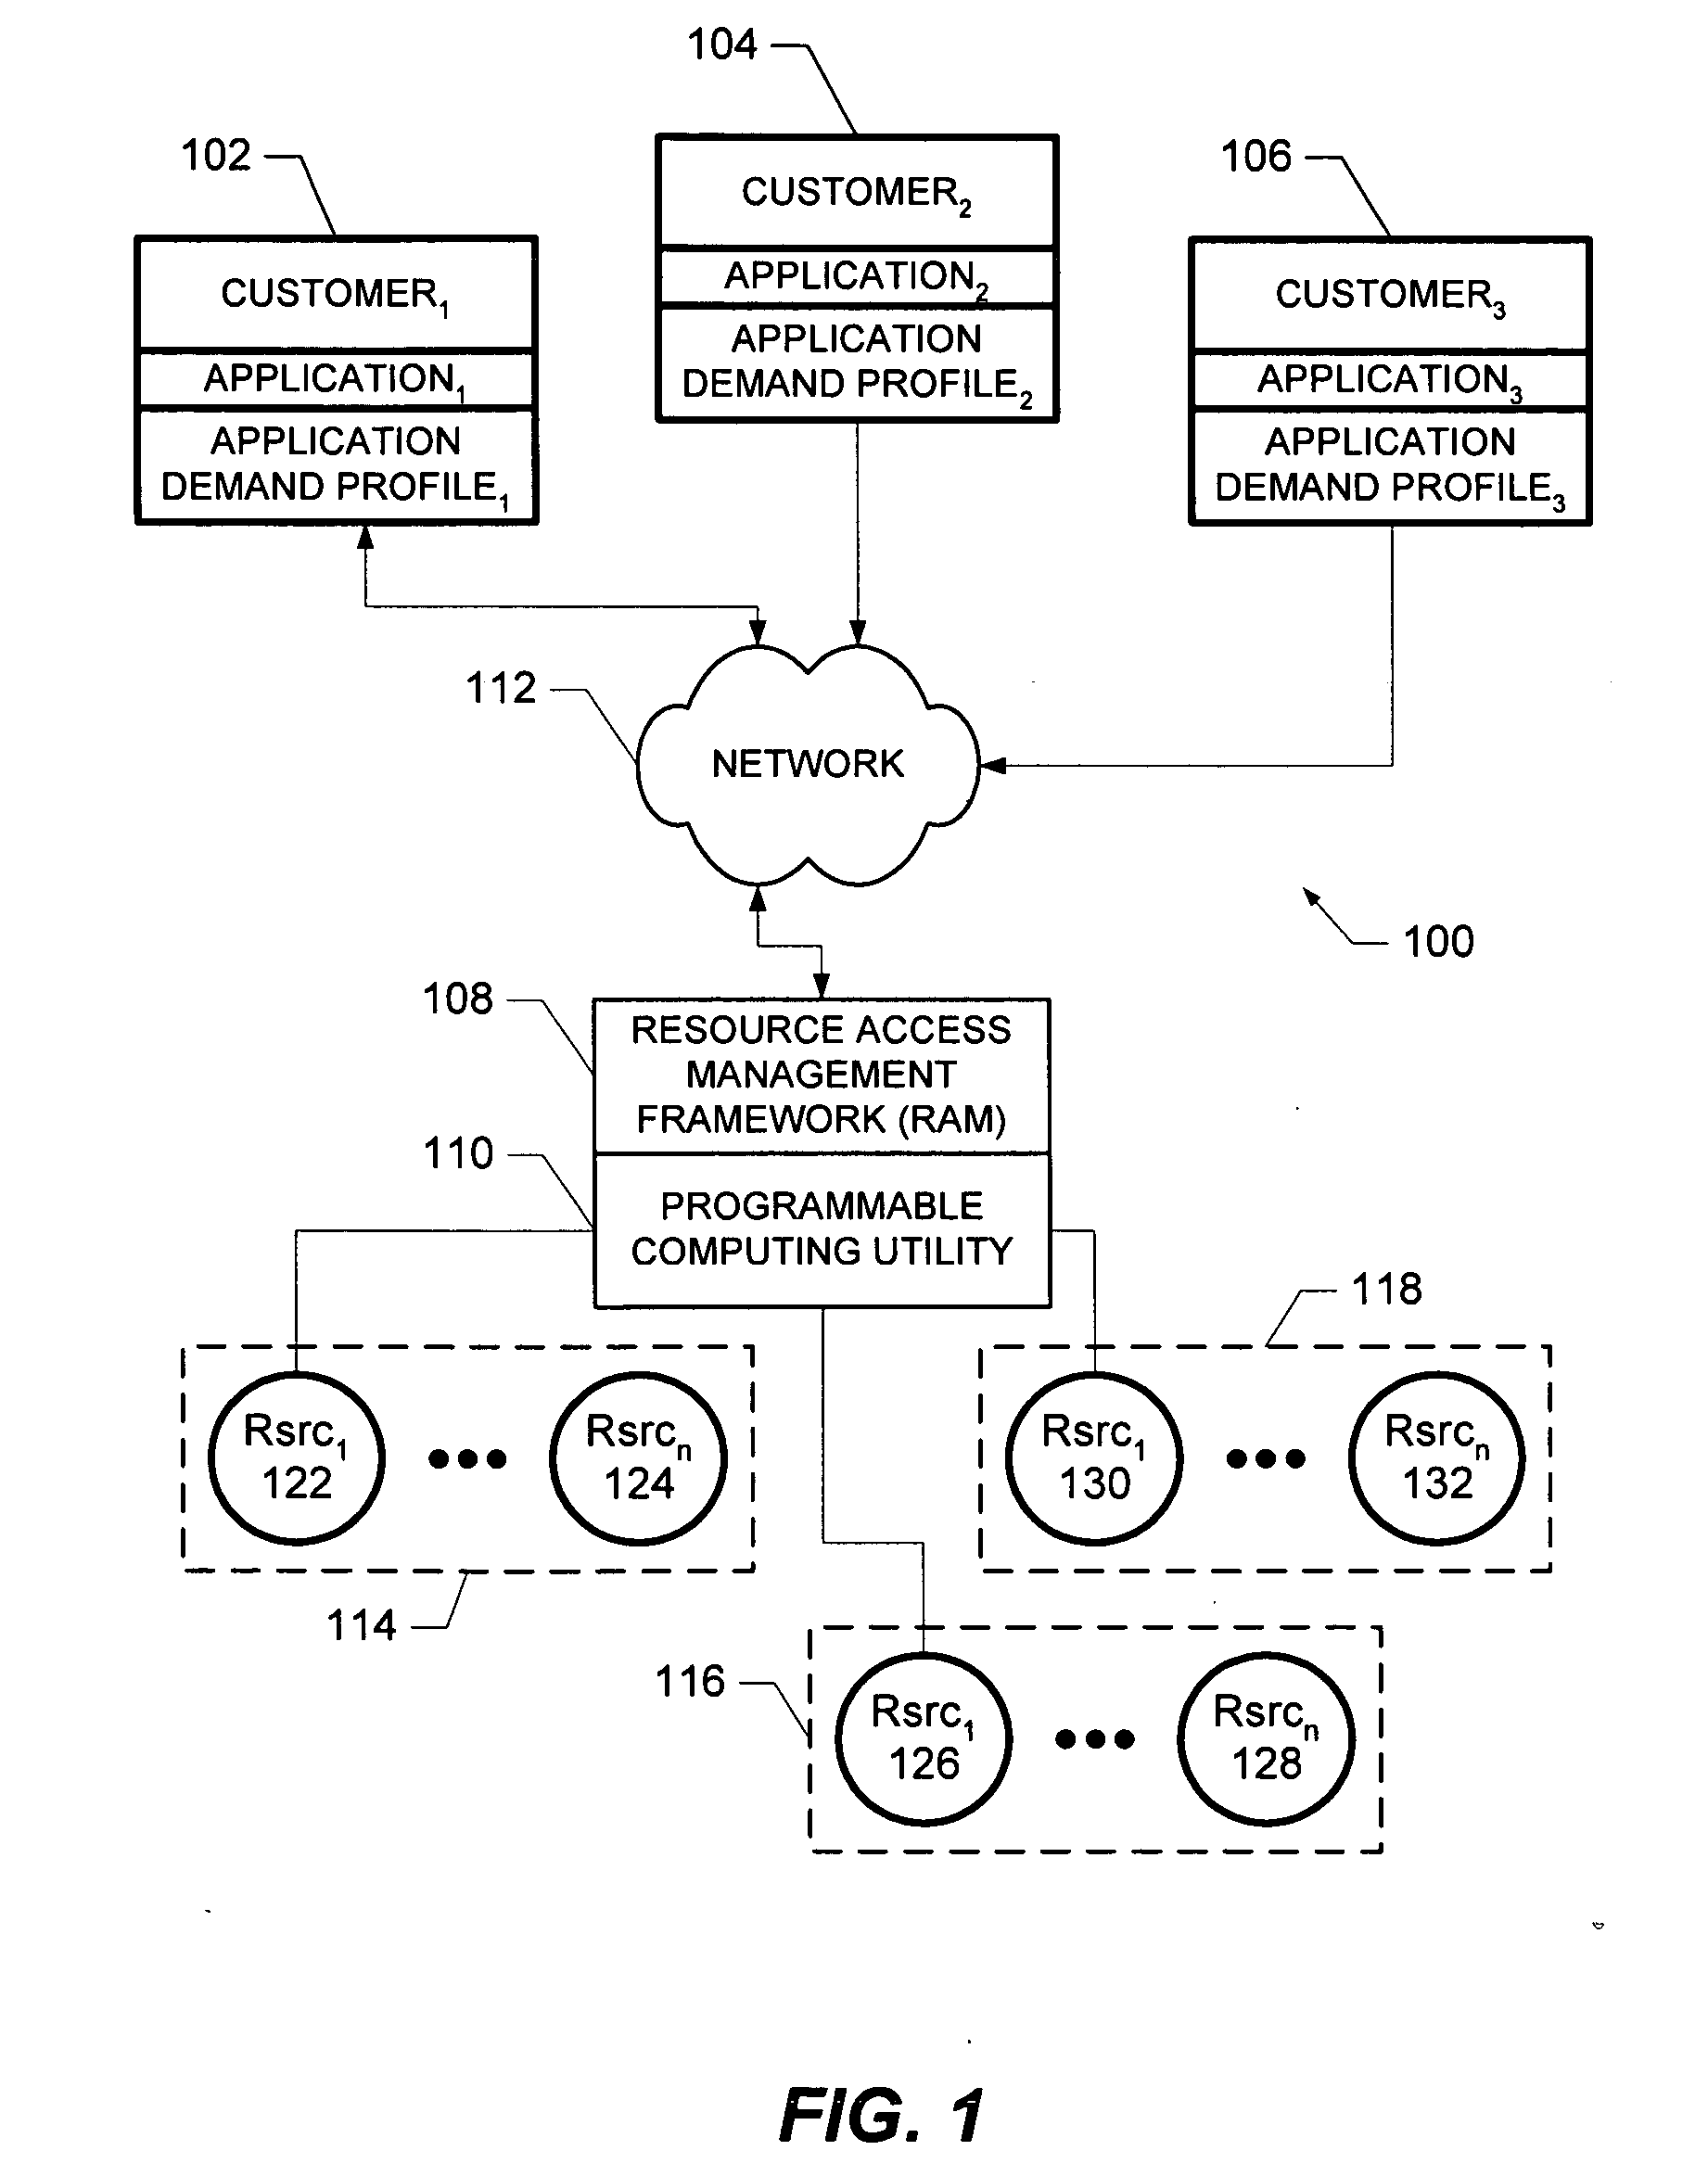 Class of service method and system for use within a computing utility